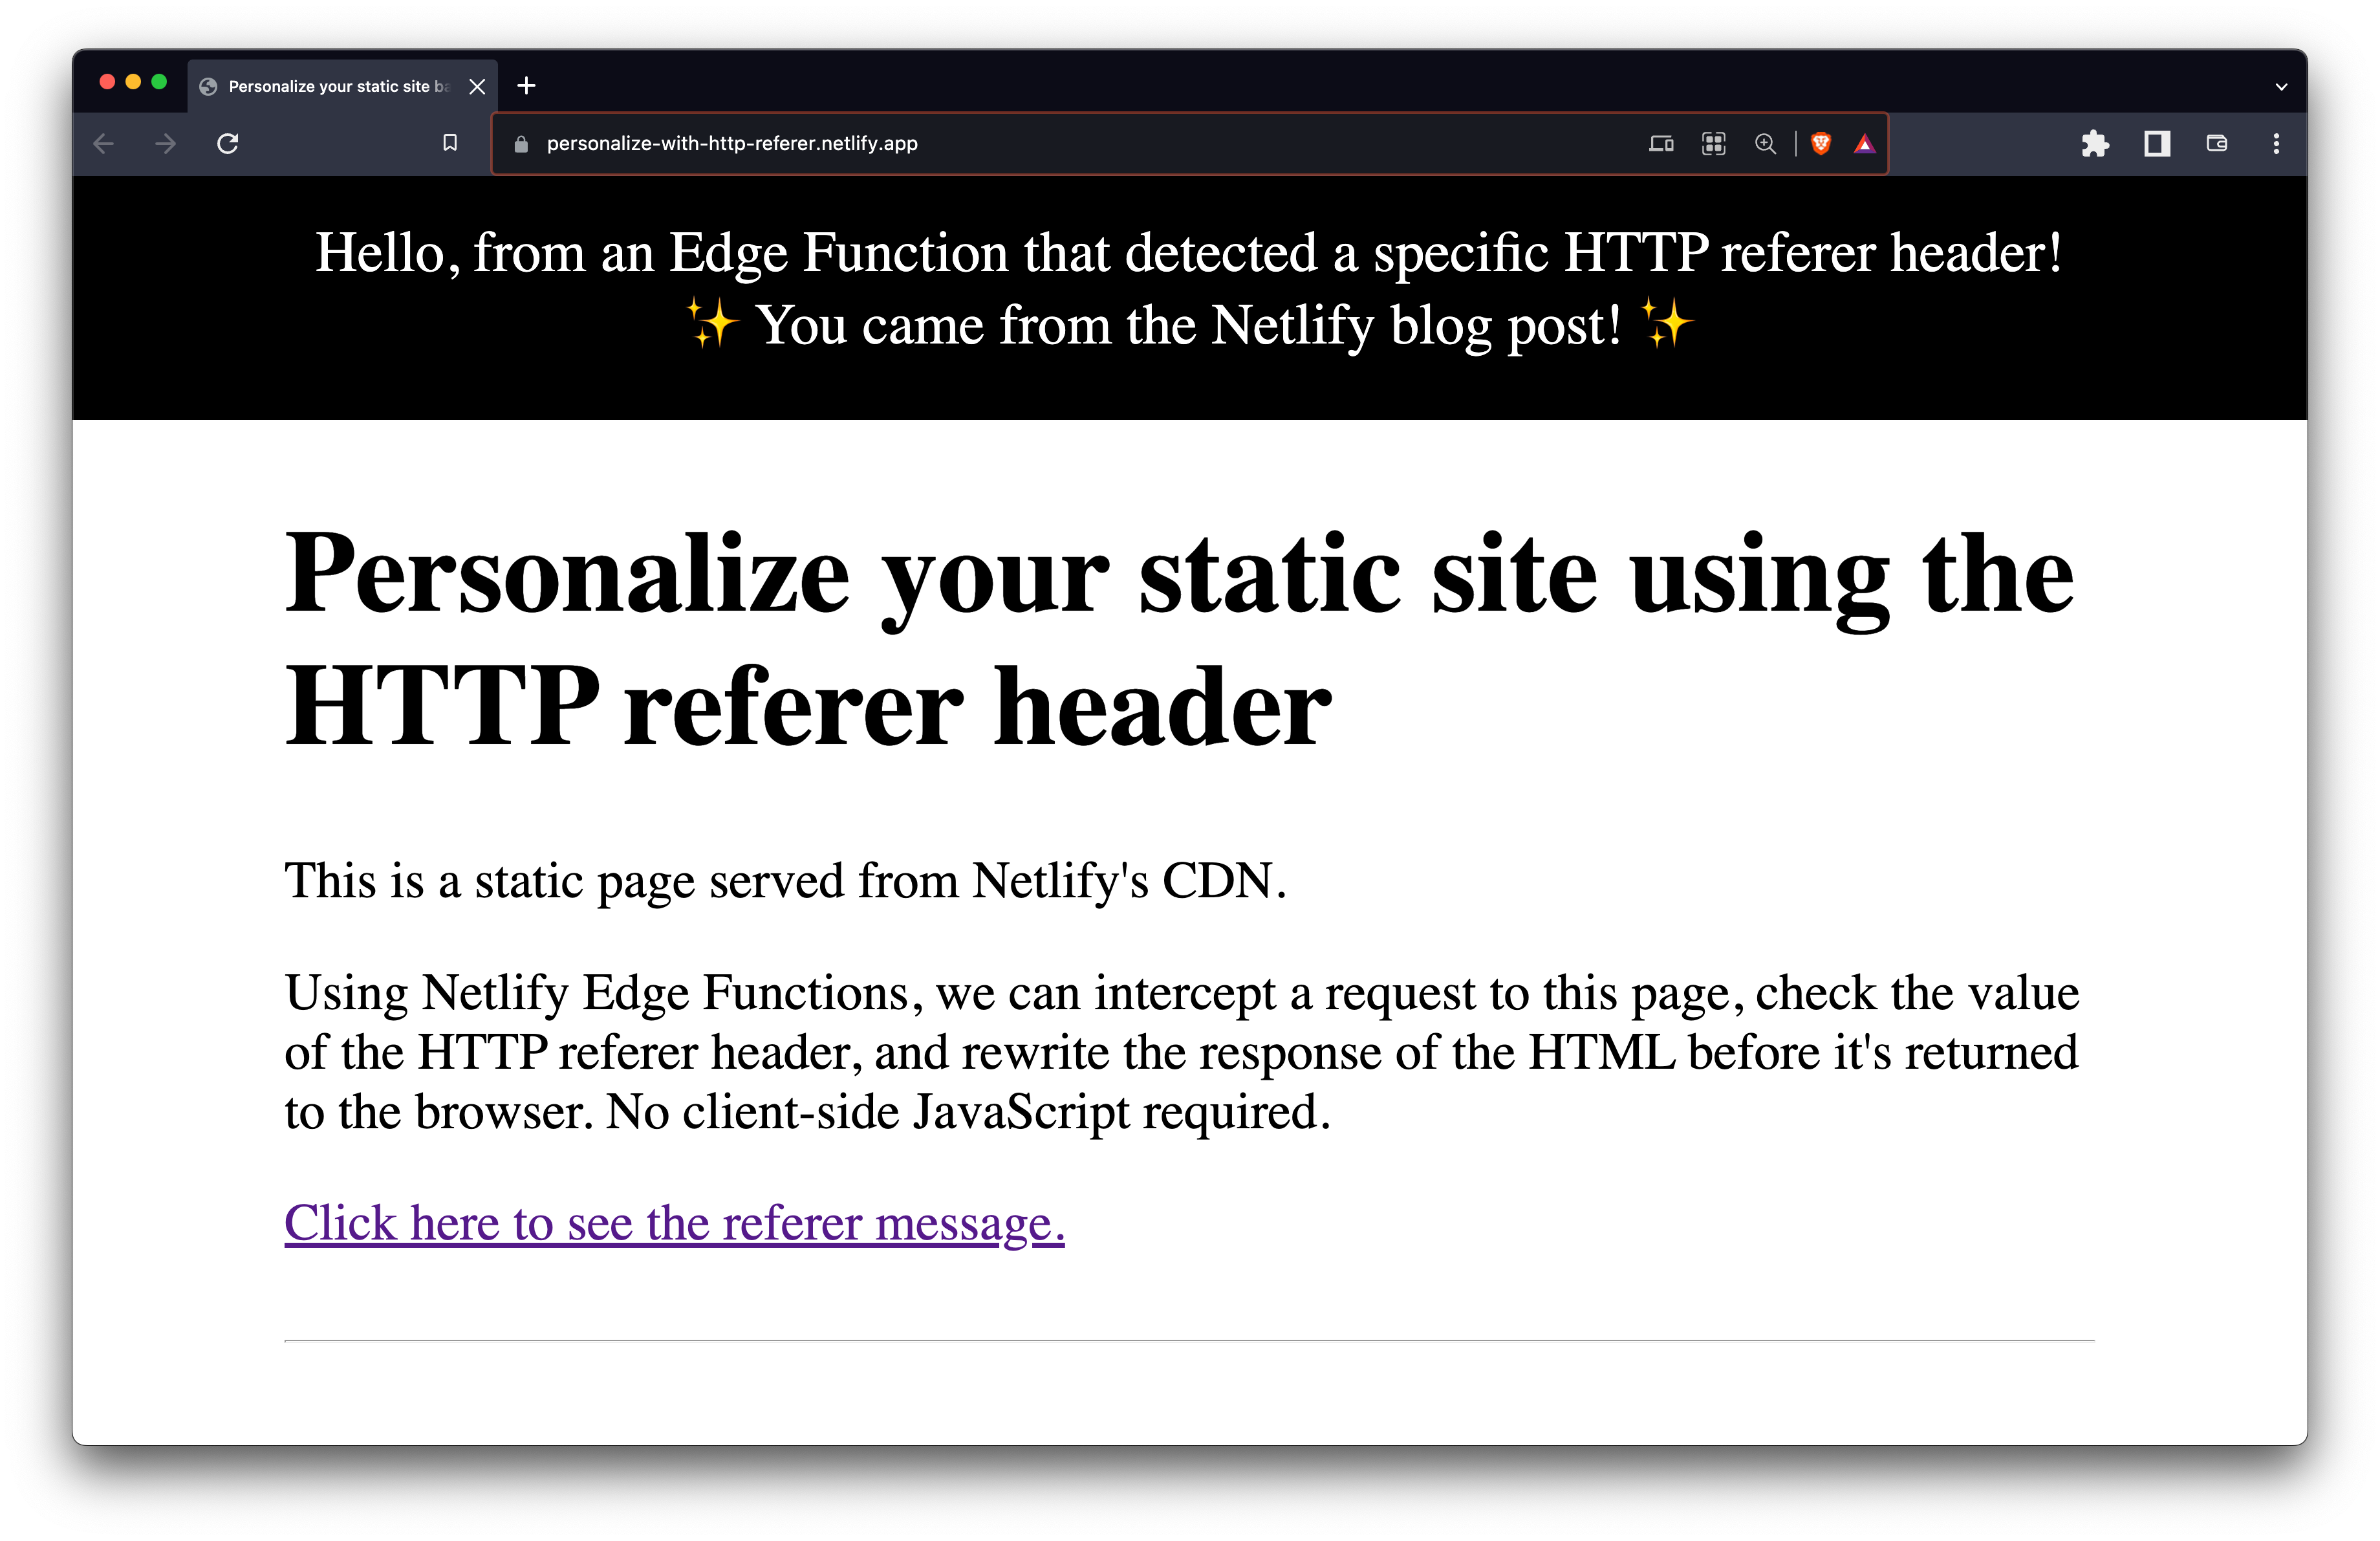 Screenshot of demo website, showing a personalized message at the top, including the message you can from the netlify blog post, showing it personalized the page based on the netlify.com referer header